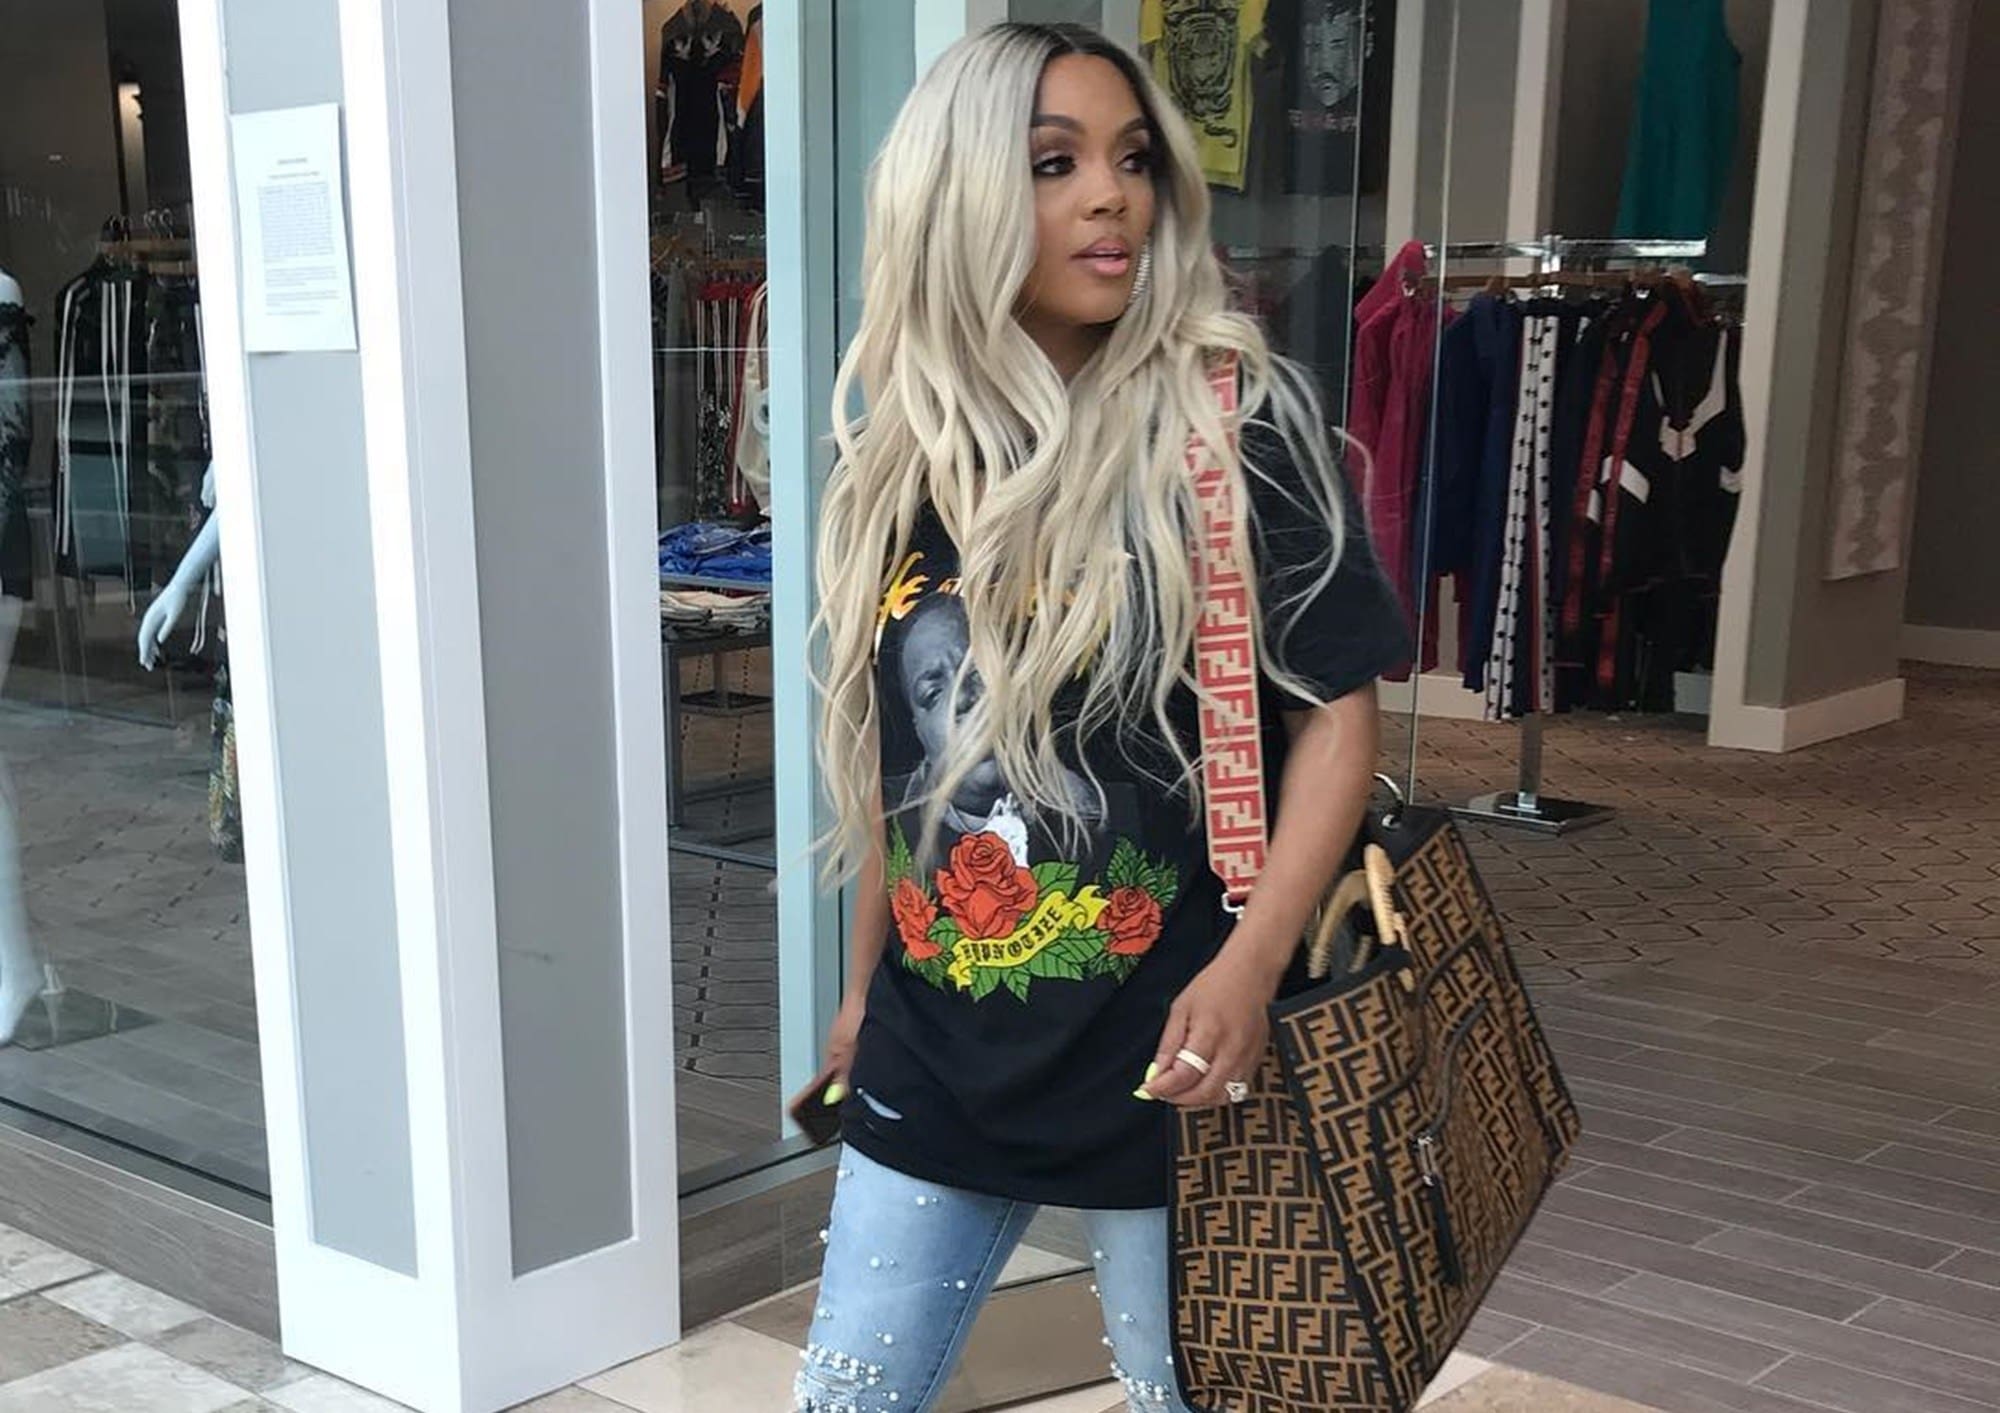 Rasheeda Frost's Fans Criticize Her After She Shares A Birthday Photo To Celebrate One OF Her Pals